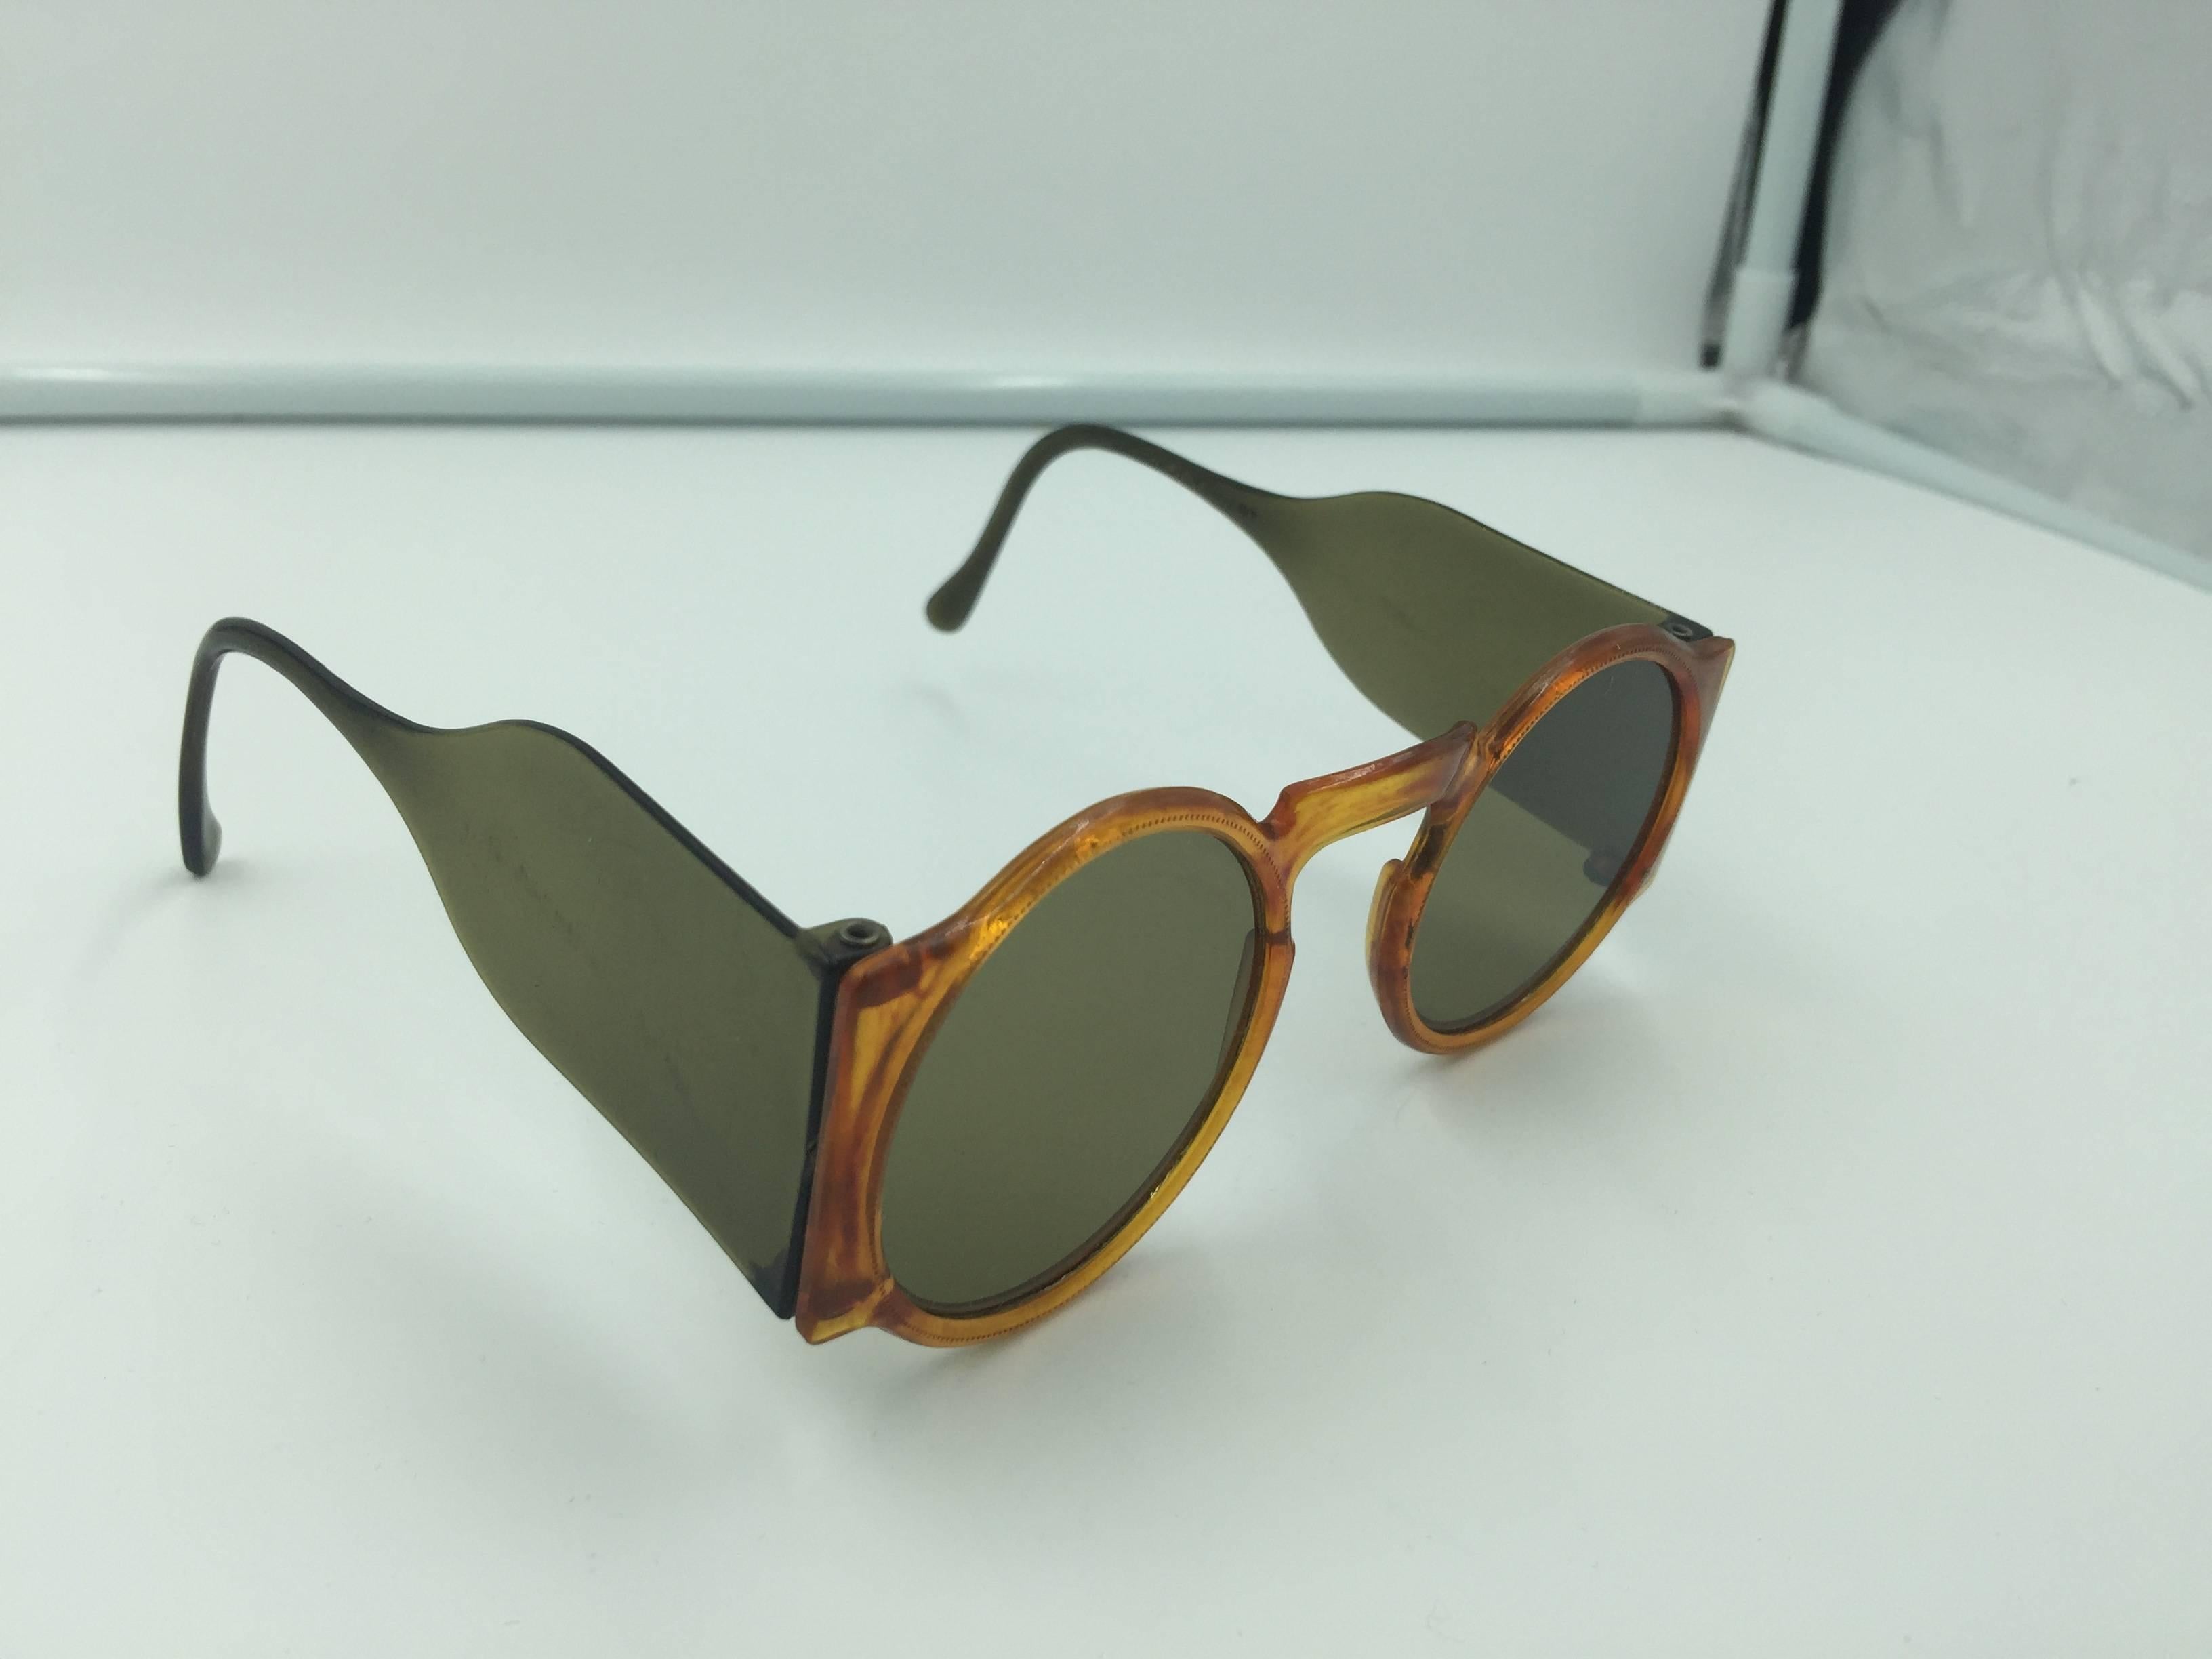 Women's Rare 1930's Faux Tortoise Sunglasses with Side Shields.